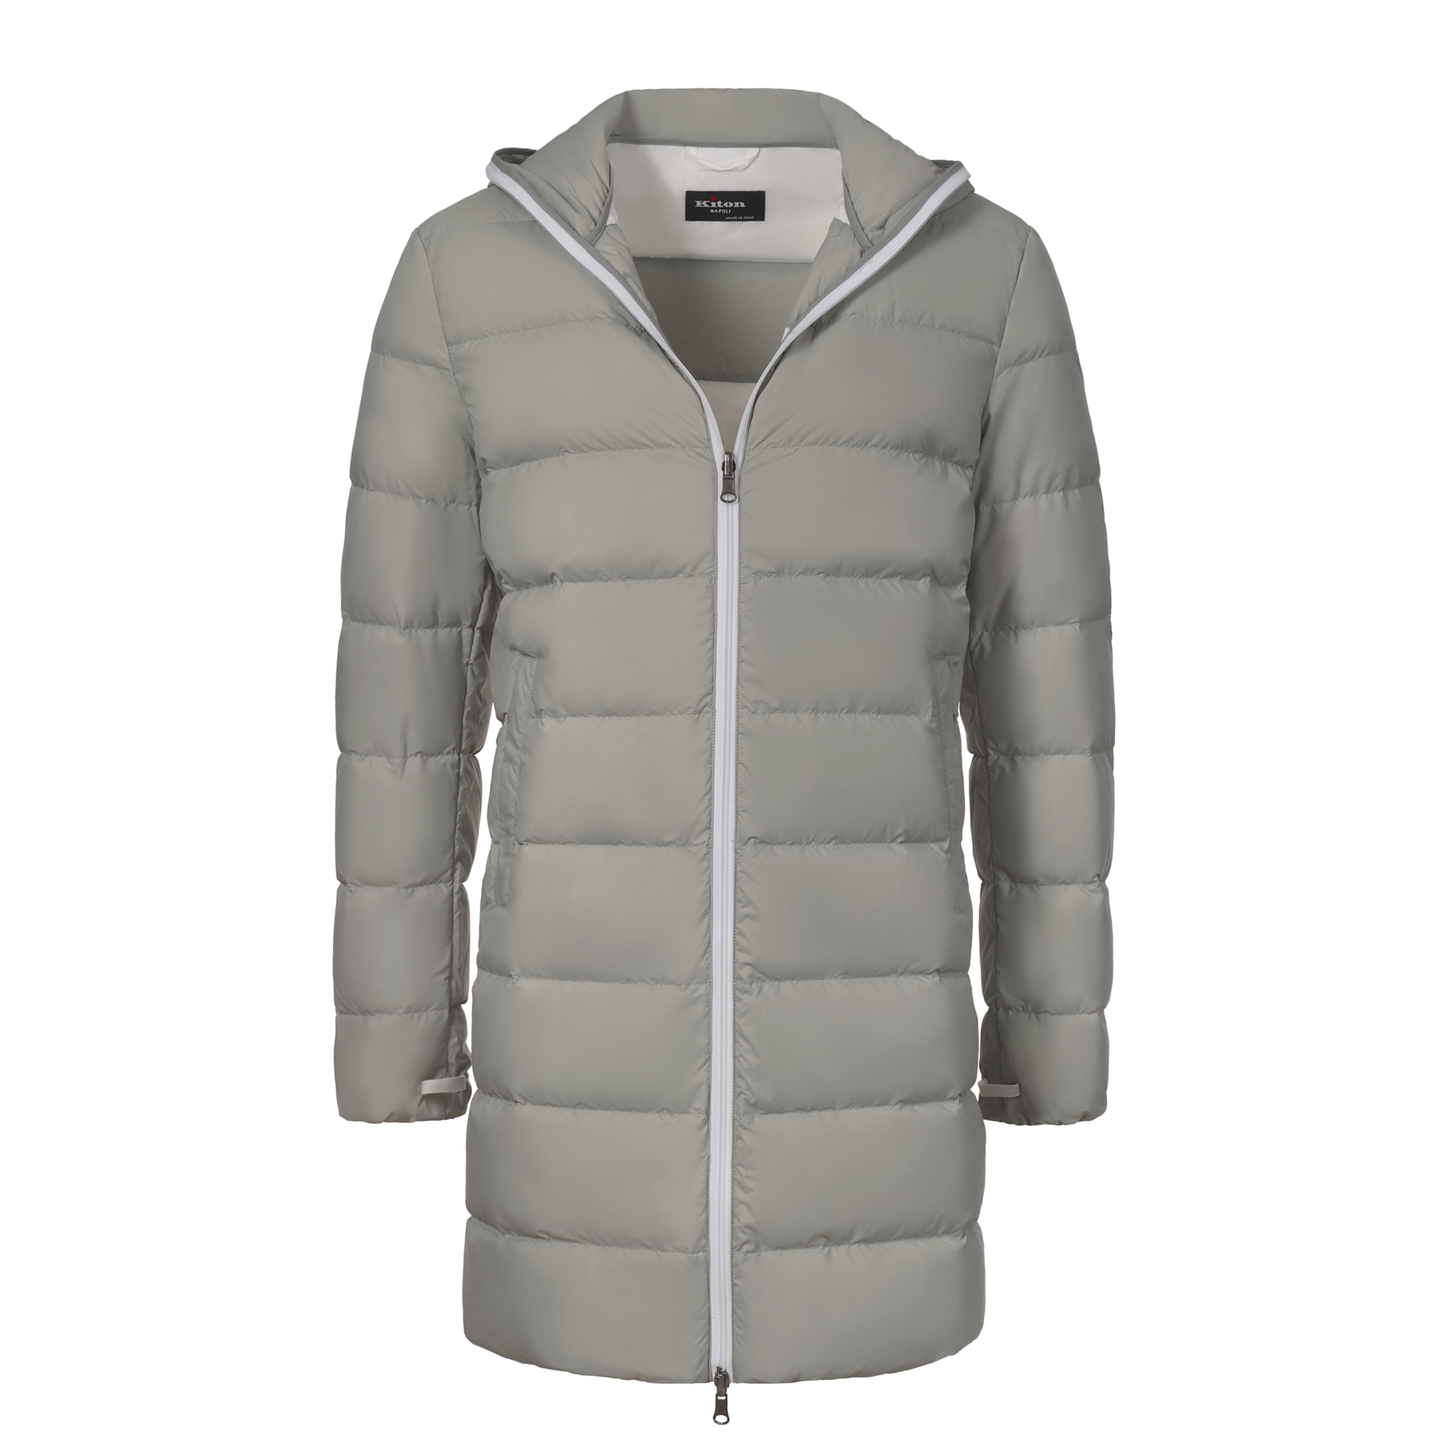 Kiton Padded Hooded Parka in Creme - SARTALE